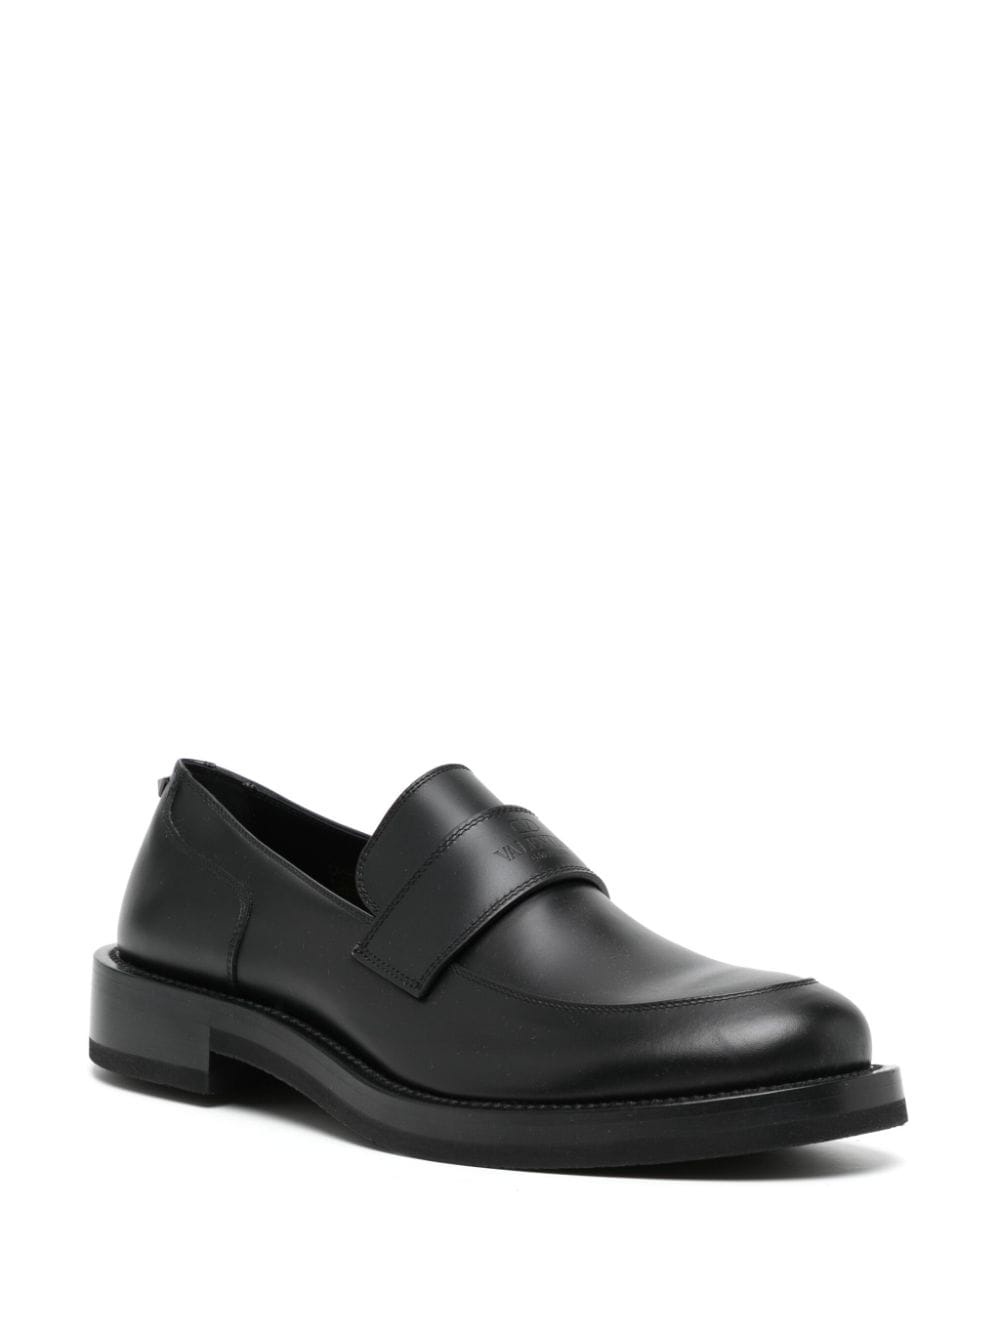 logo-debossed leather loafers - 2